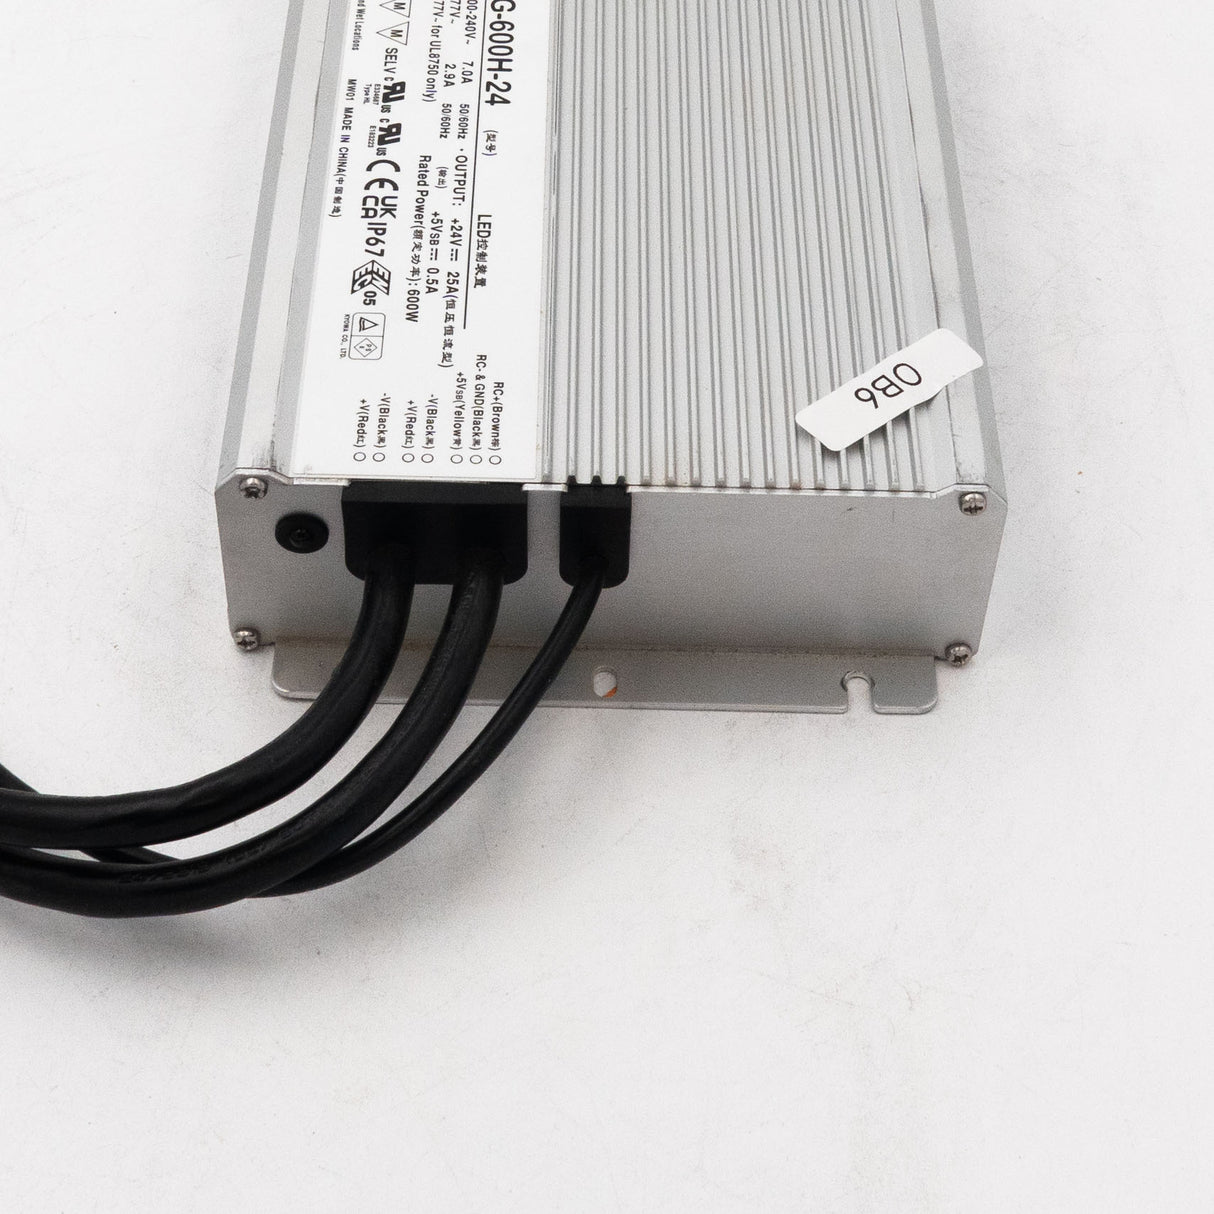 Mean Well HLG-600H-24 Power Supply 600W 24V - Open Box